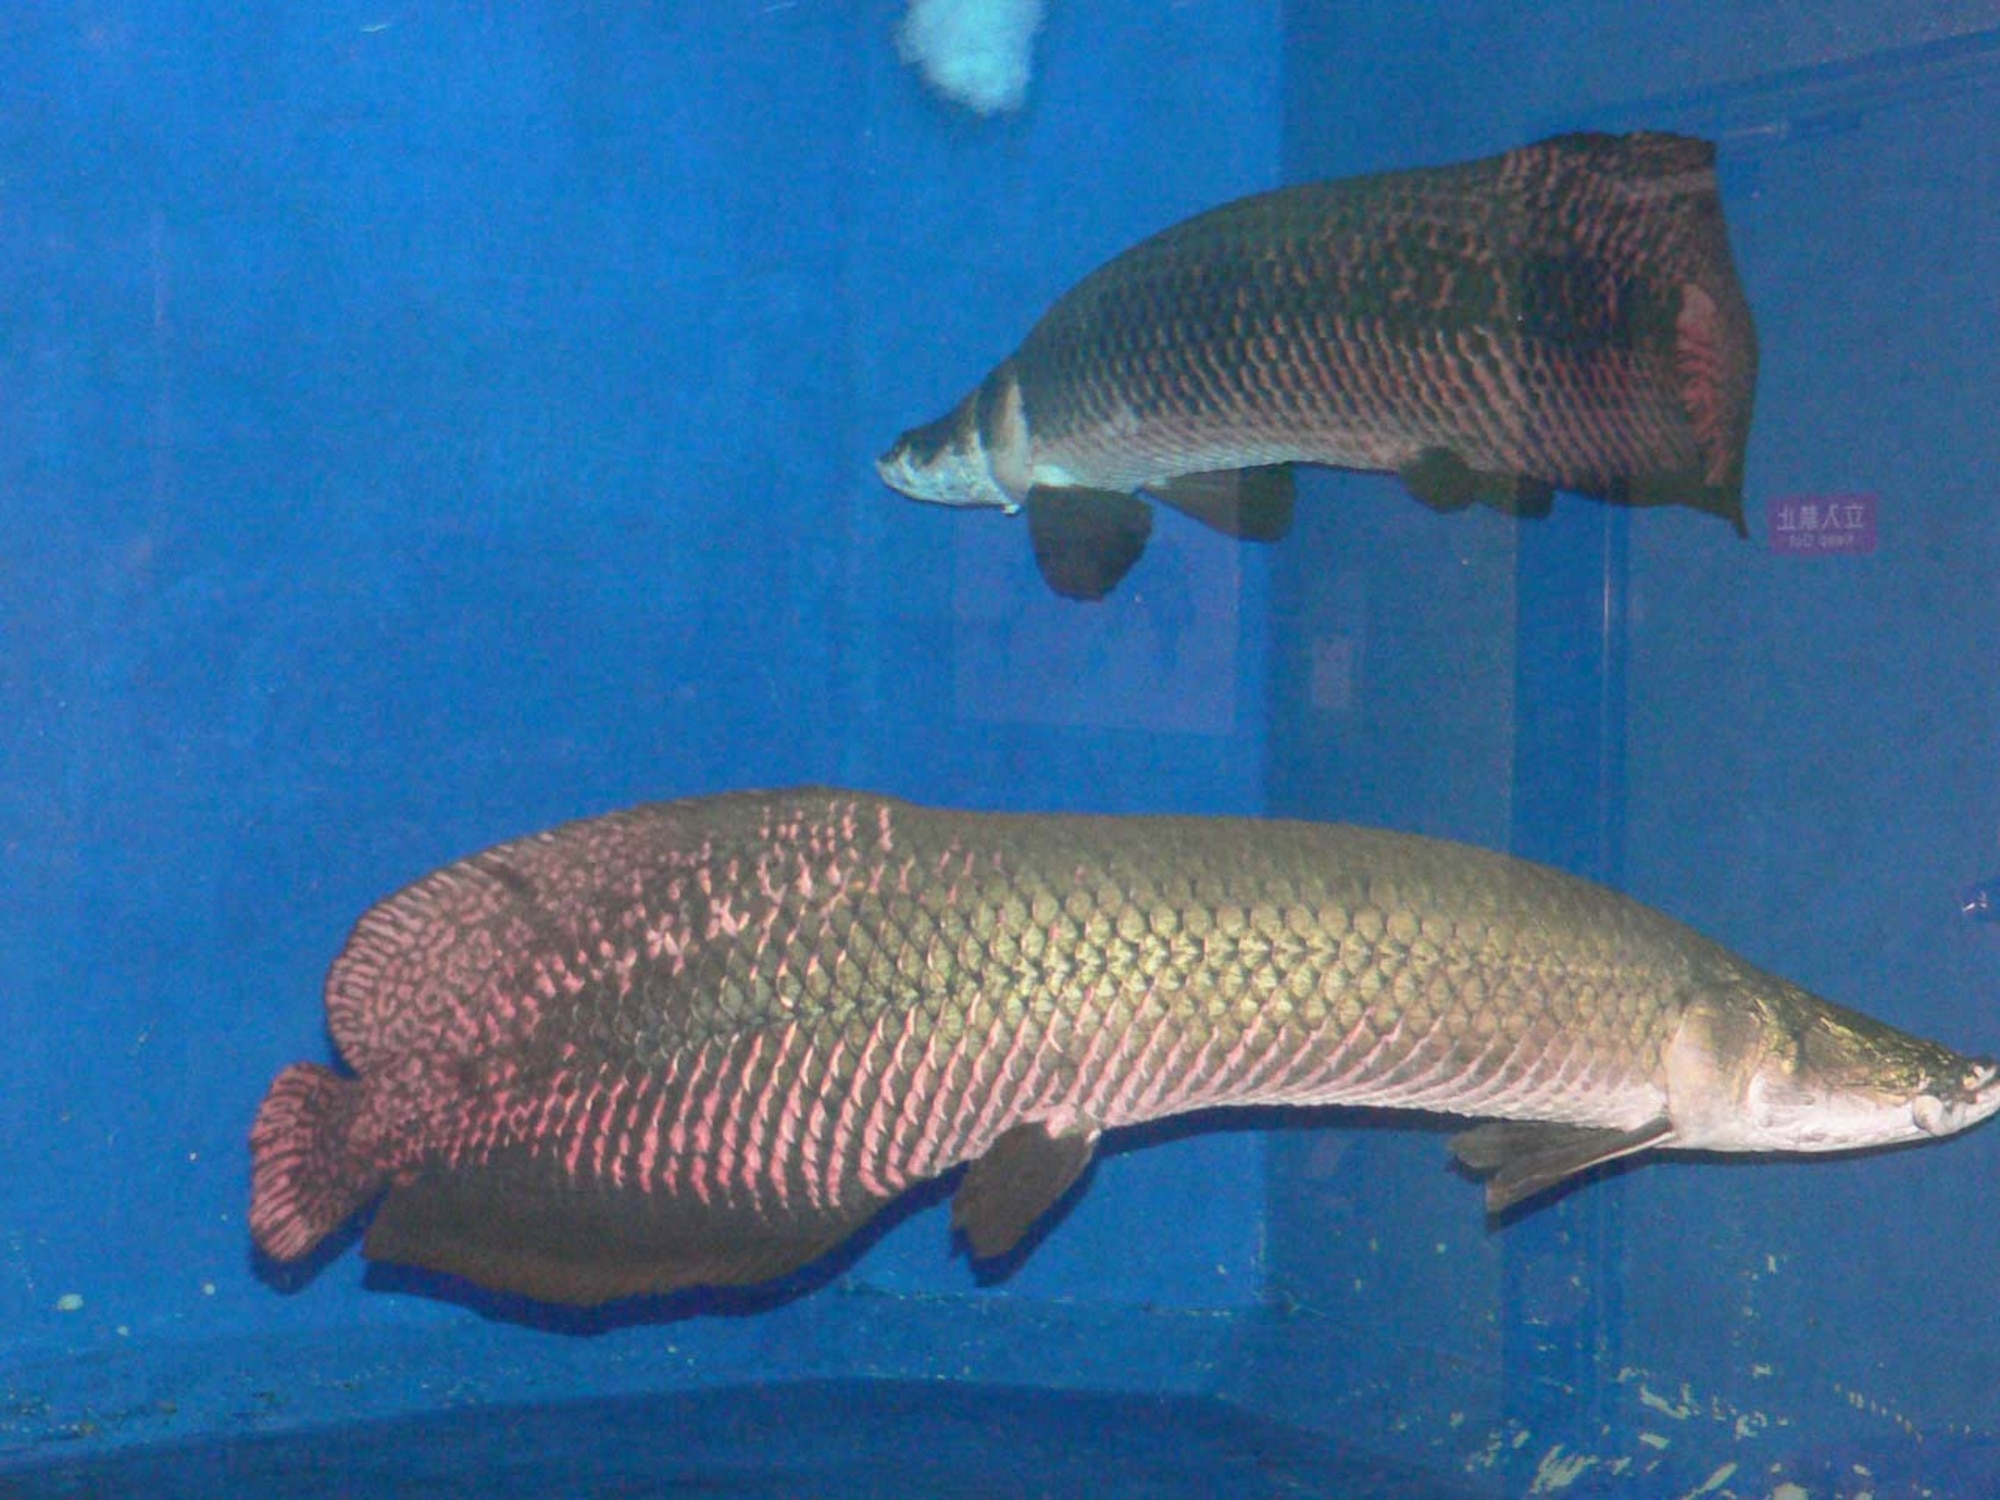 070306 -- AOMORI, Japan -- Two Pirarucu, one of the largest freshwater fish in the world can be found in the waters of the Amazon in South America. It can grow up to 10 feet long and weighs around 400 pounds. These fish can be seen on the second floor of the  the Aquarium Asamushi. The aquarium is approximately 90 minutes by car or bus from Misawa Air Base, Japan. (U.S. Air Force photo by Staff Sgt. A.C. Eggman)